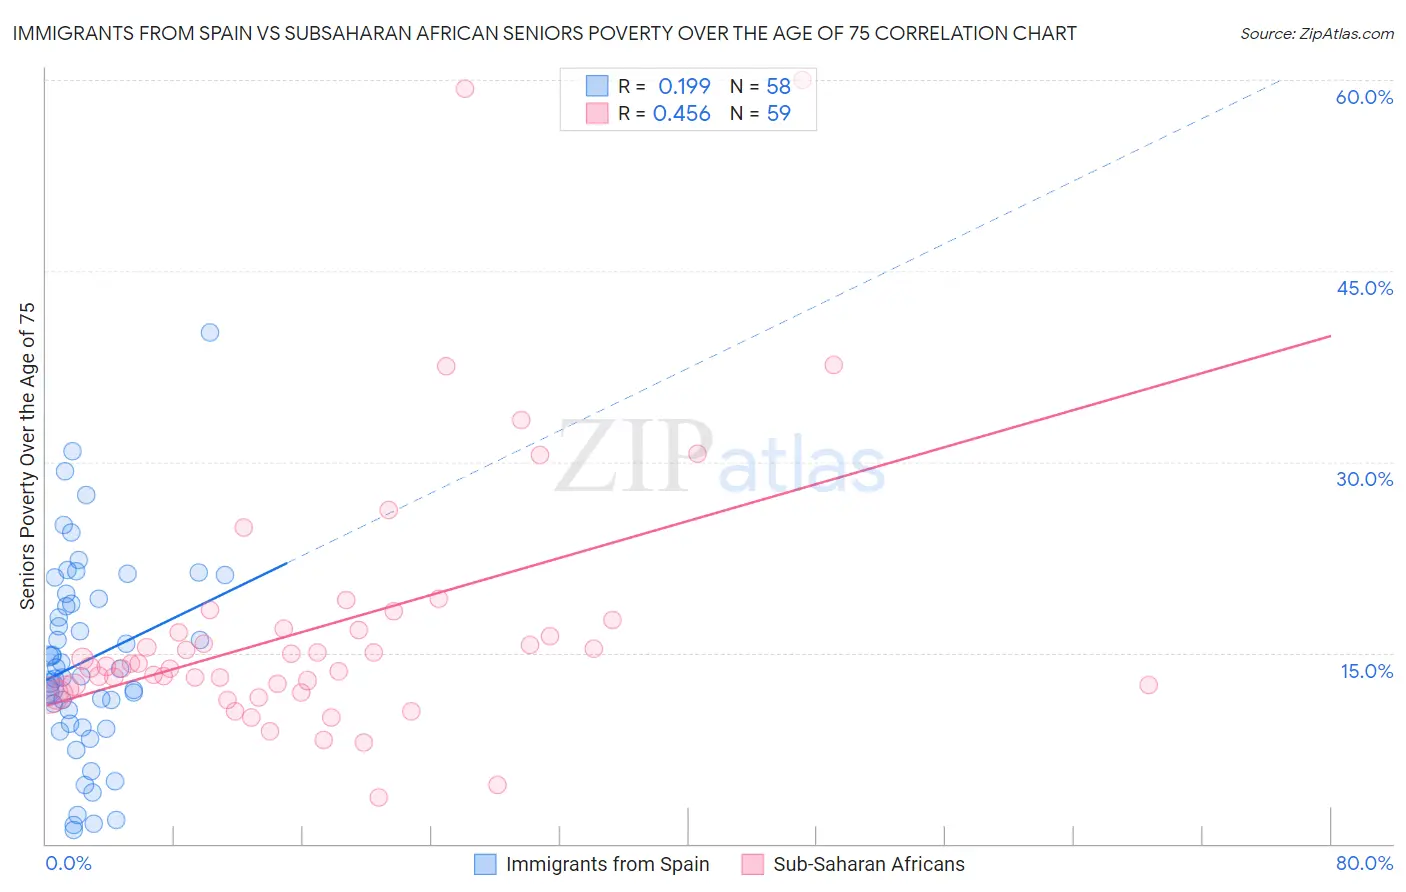 Immigrants from Spain vs Subsaharan African Seniors Poverty Over the Age of 75